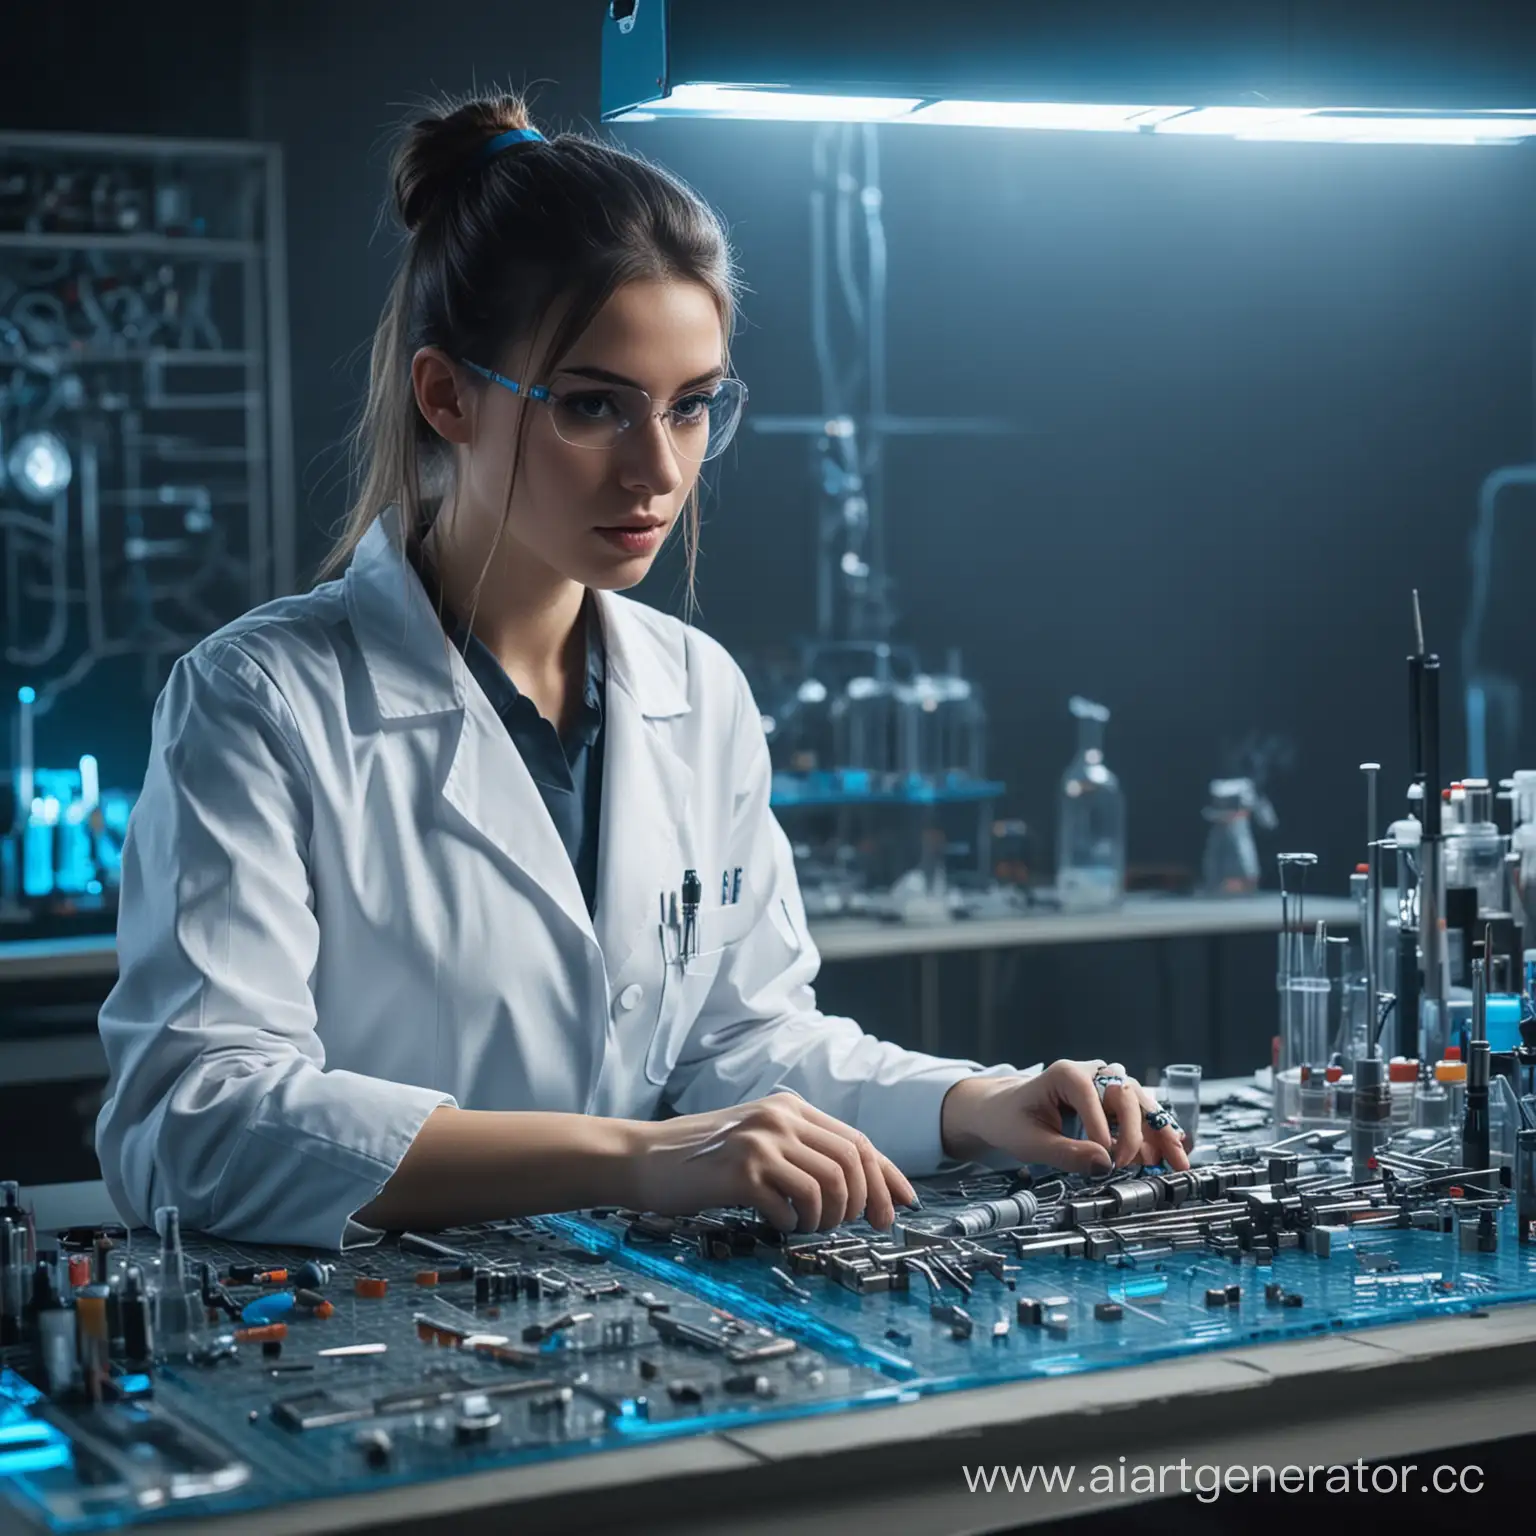 Young-Female-Doctor-Assembles-Cyberpunk-Figure-in-Laboratory-with-Neon-Blue-Grid